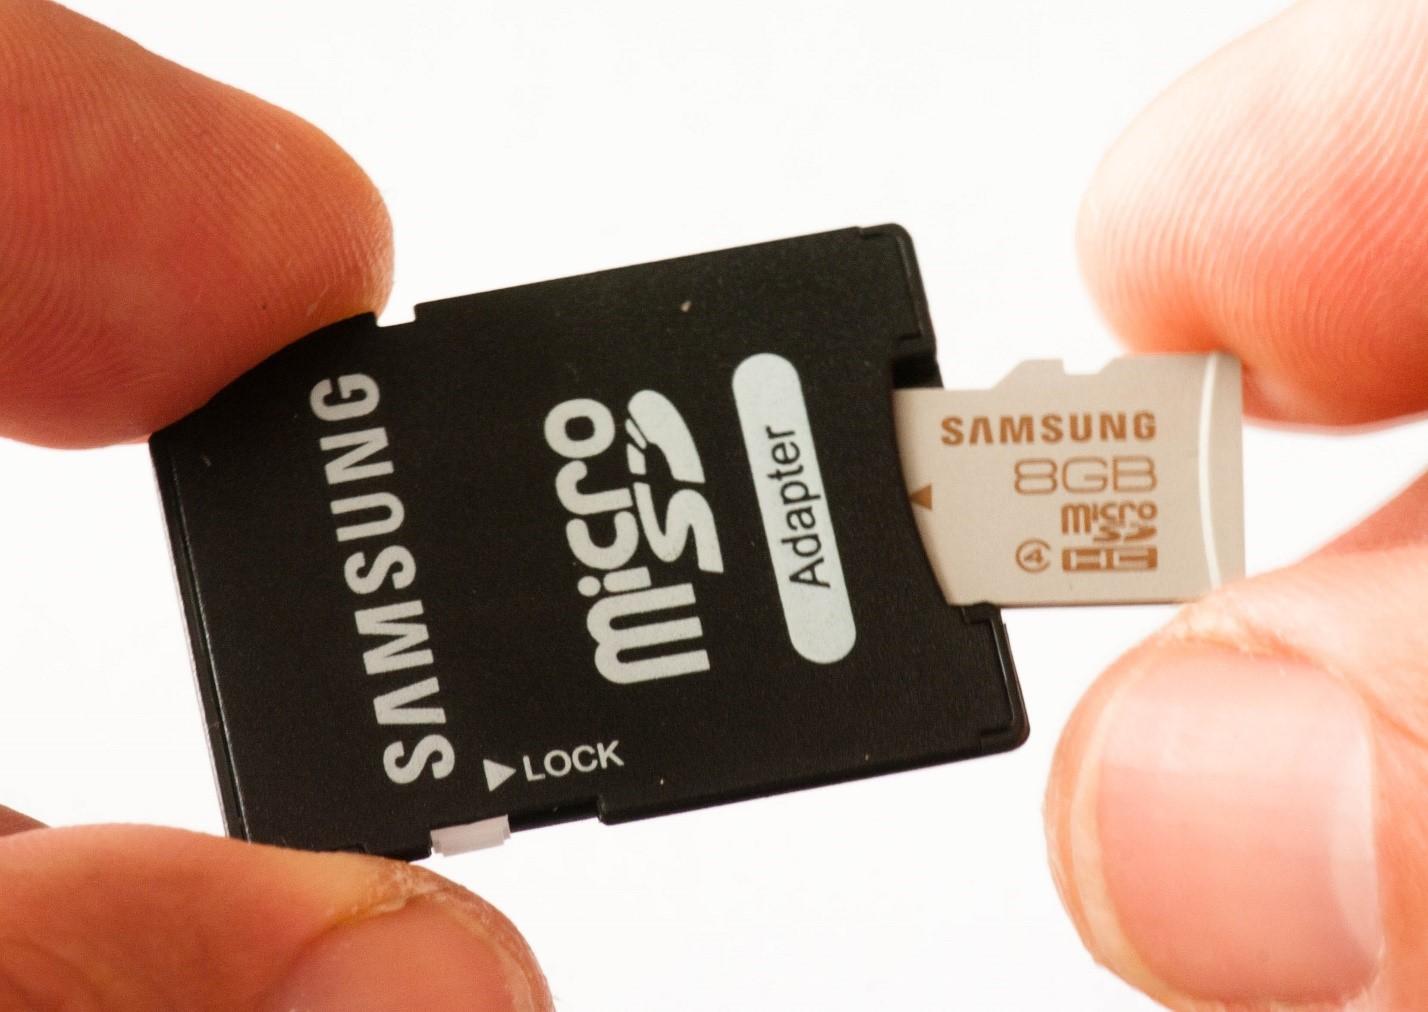 How to recover data from a faulty memory card